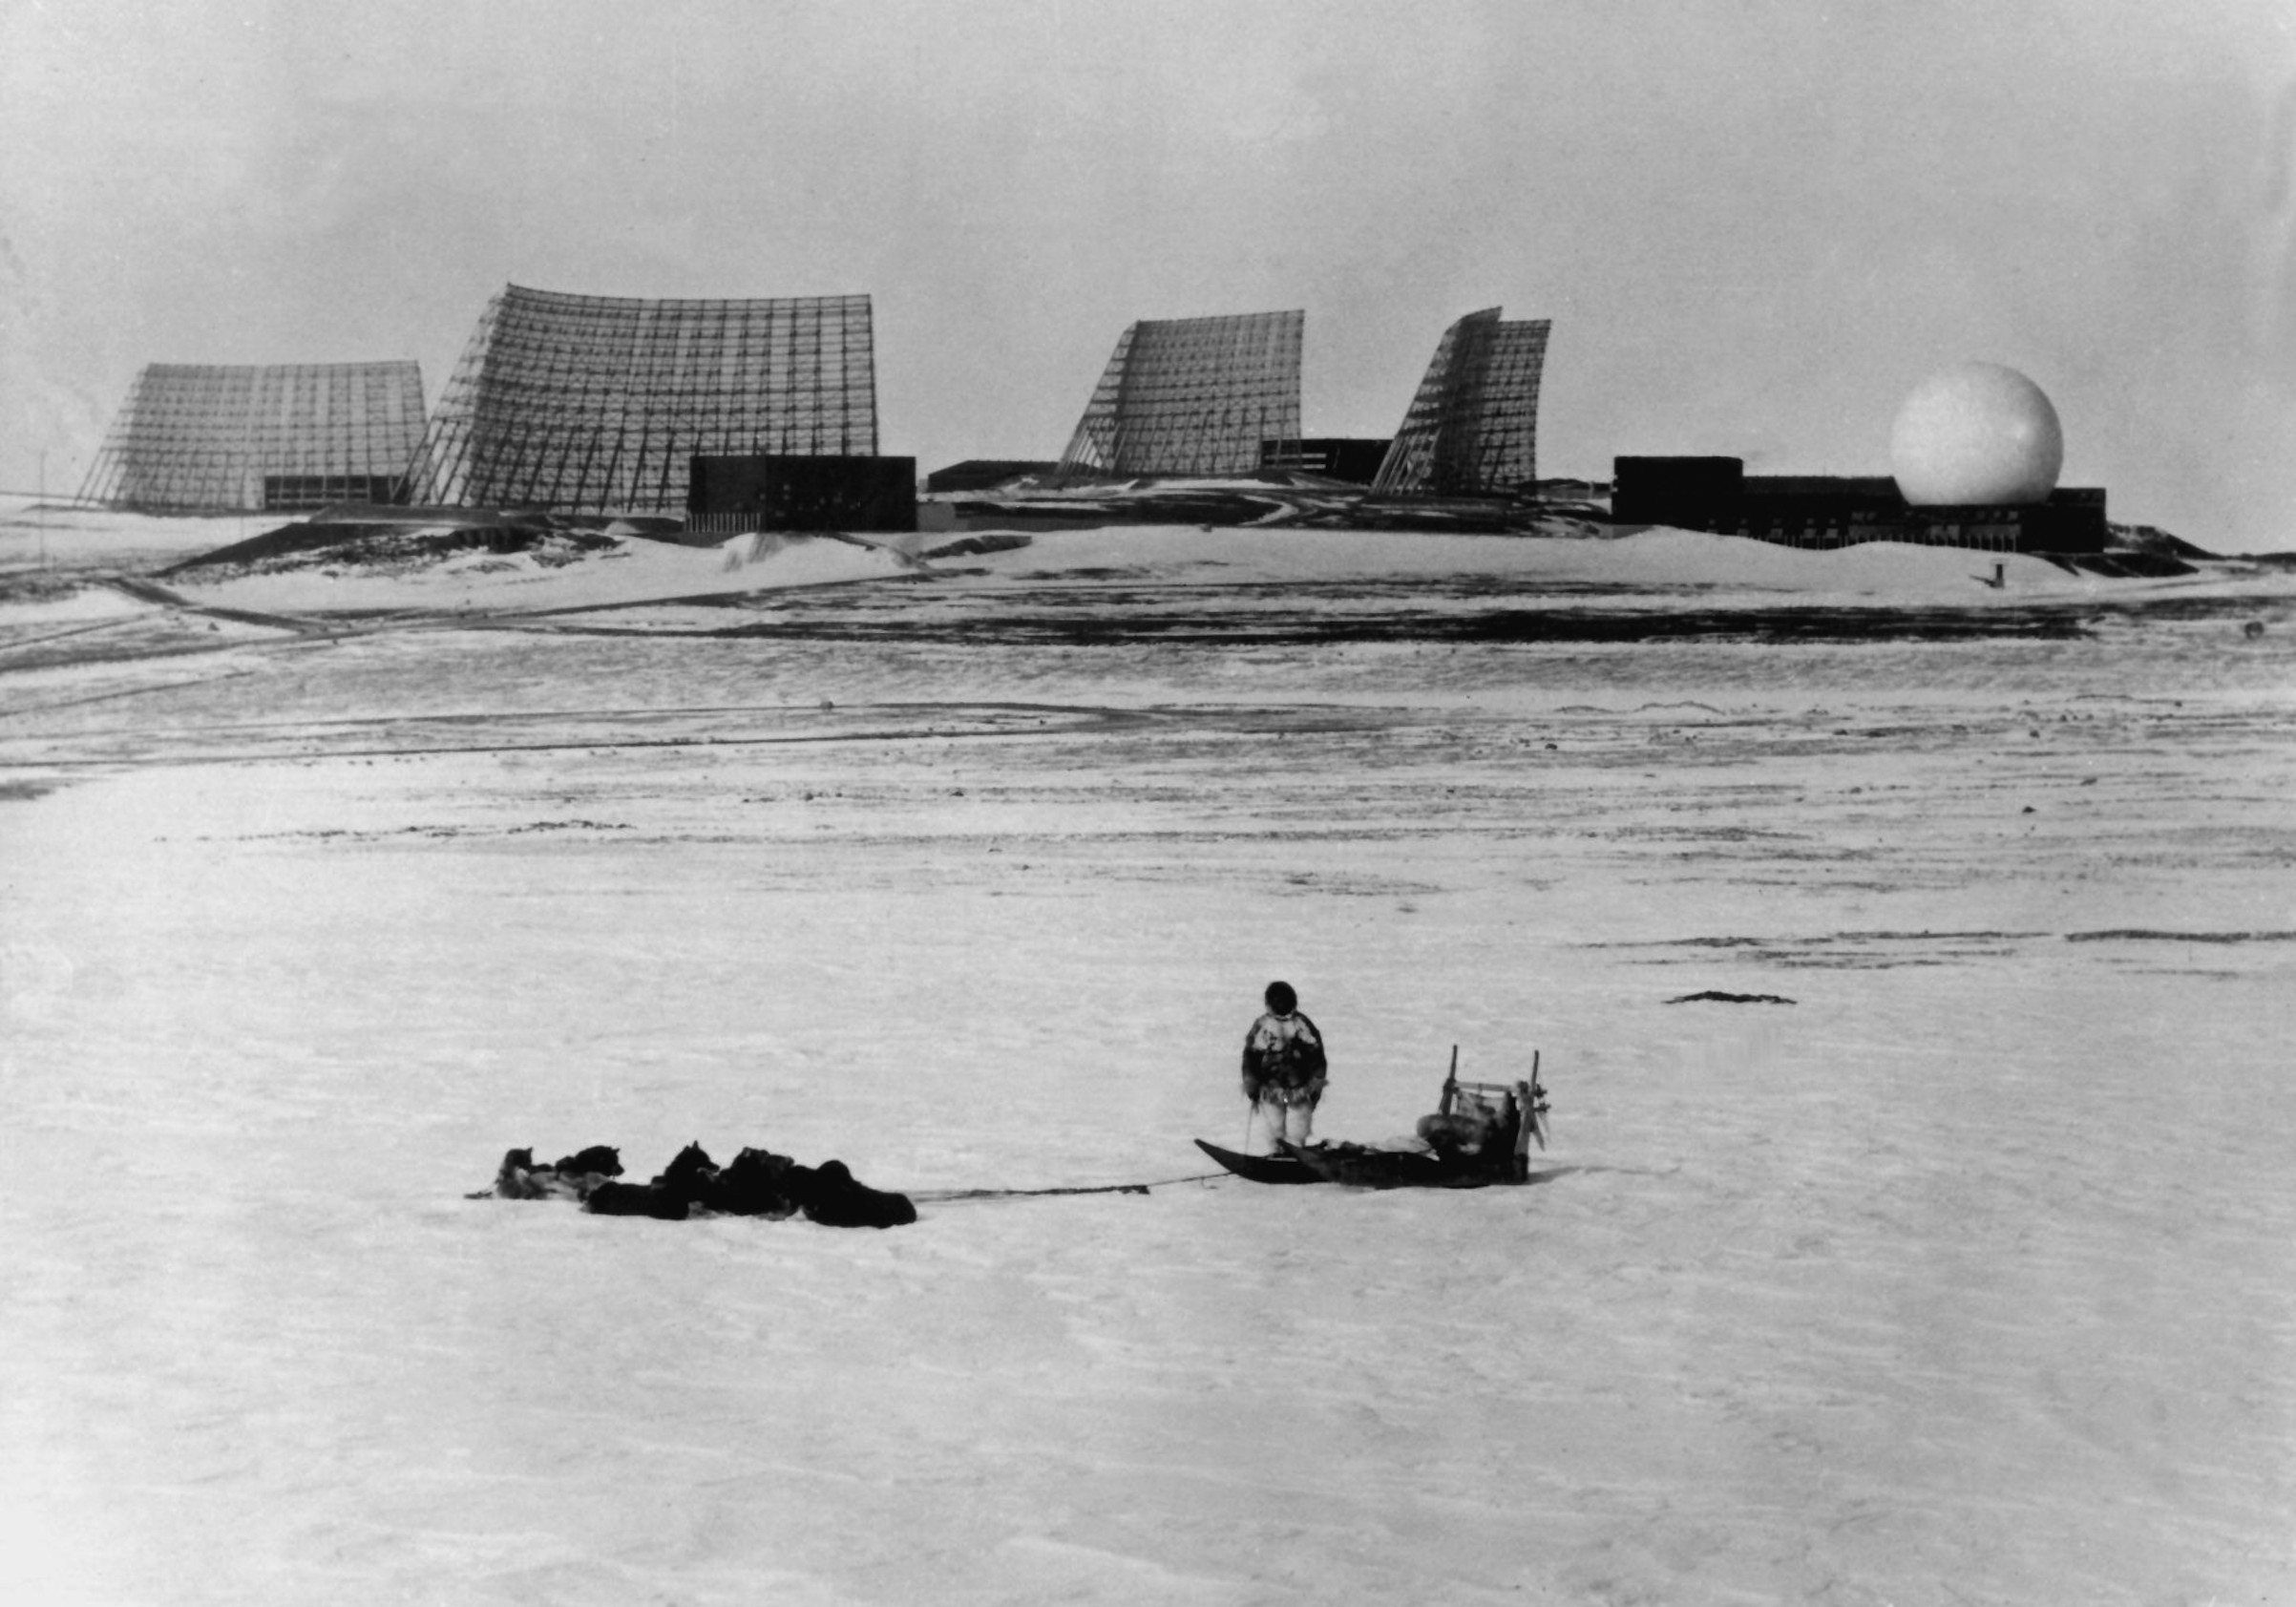 A Greenlander with his dog sleigh looks at the radars at Thule Air Base in Northern Greenland in 1966. (NF/AFP/Getty Images)